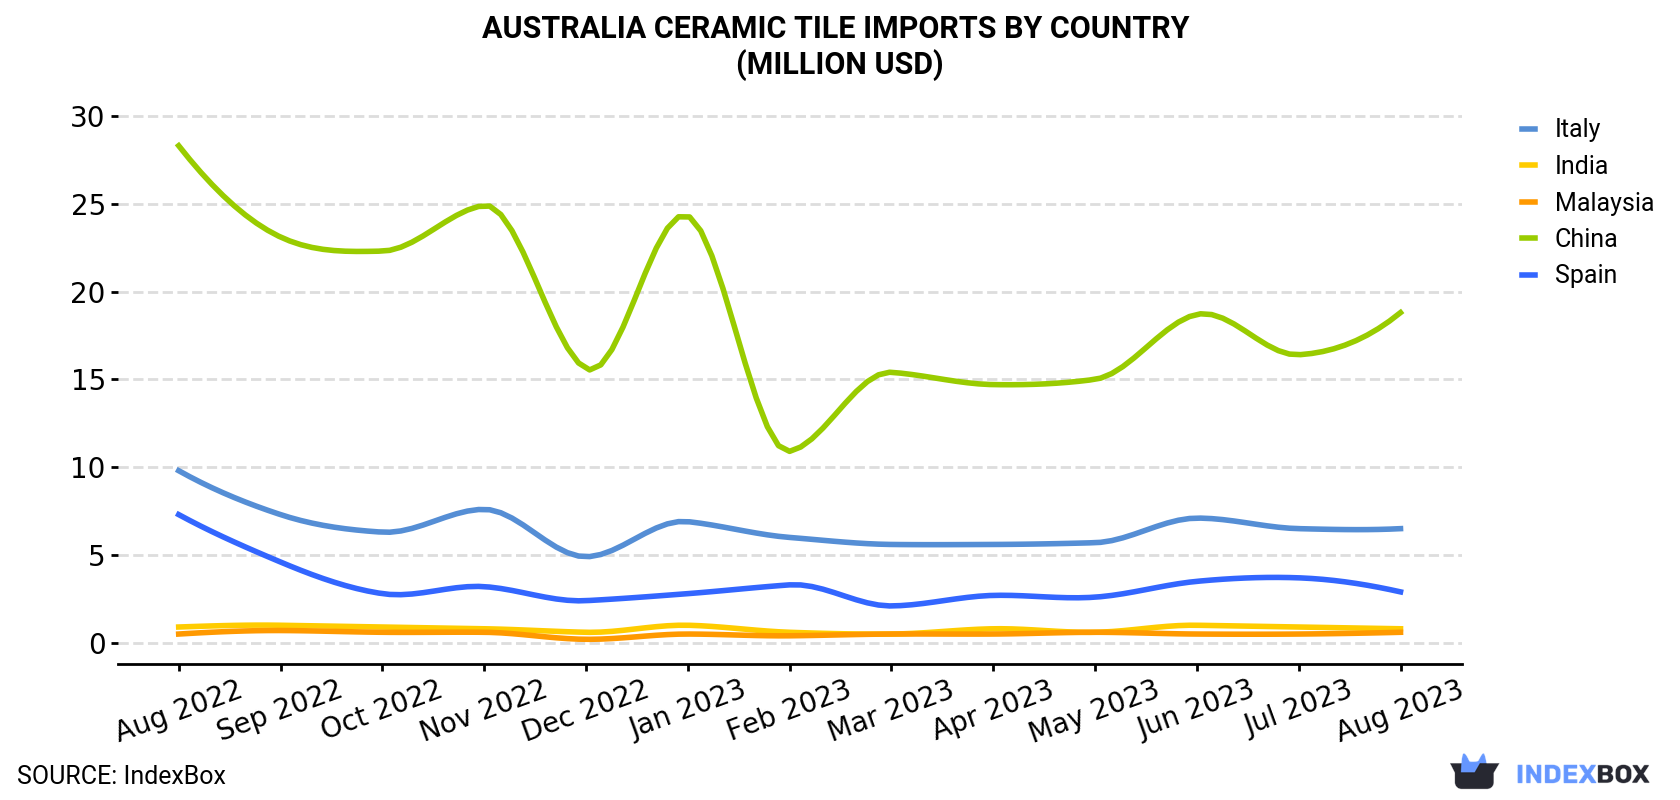 Australia Ceramic Tile Imports By Country (Million USD)